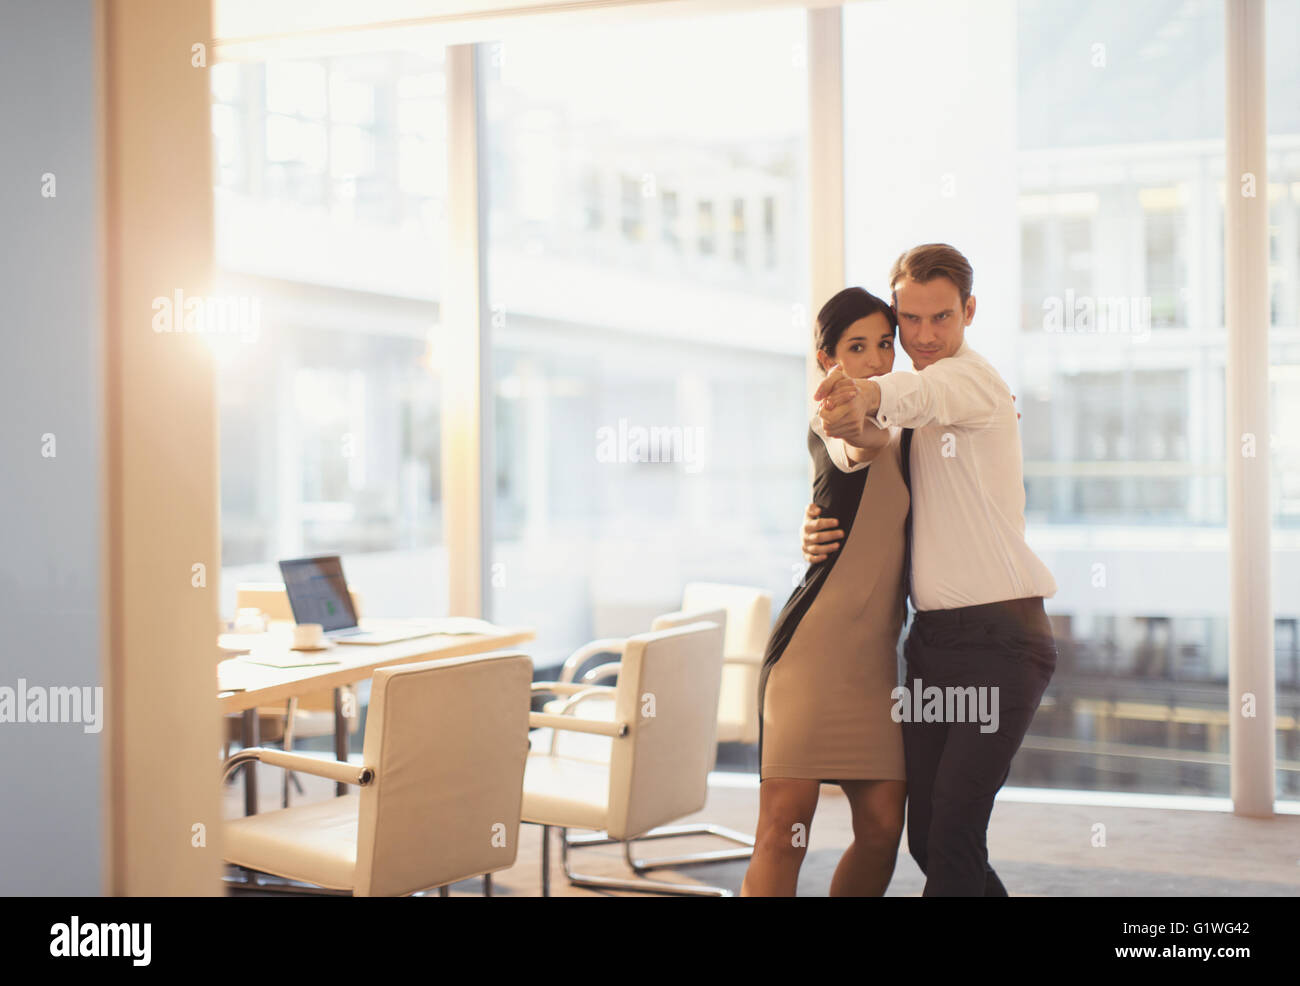 Businessman and businesswoman dancing in conference room Stock Photo